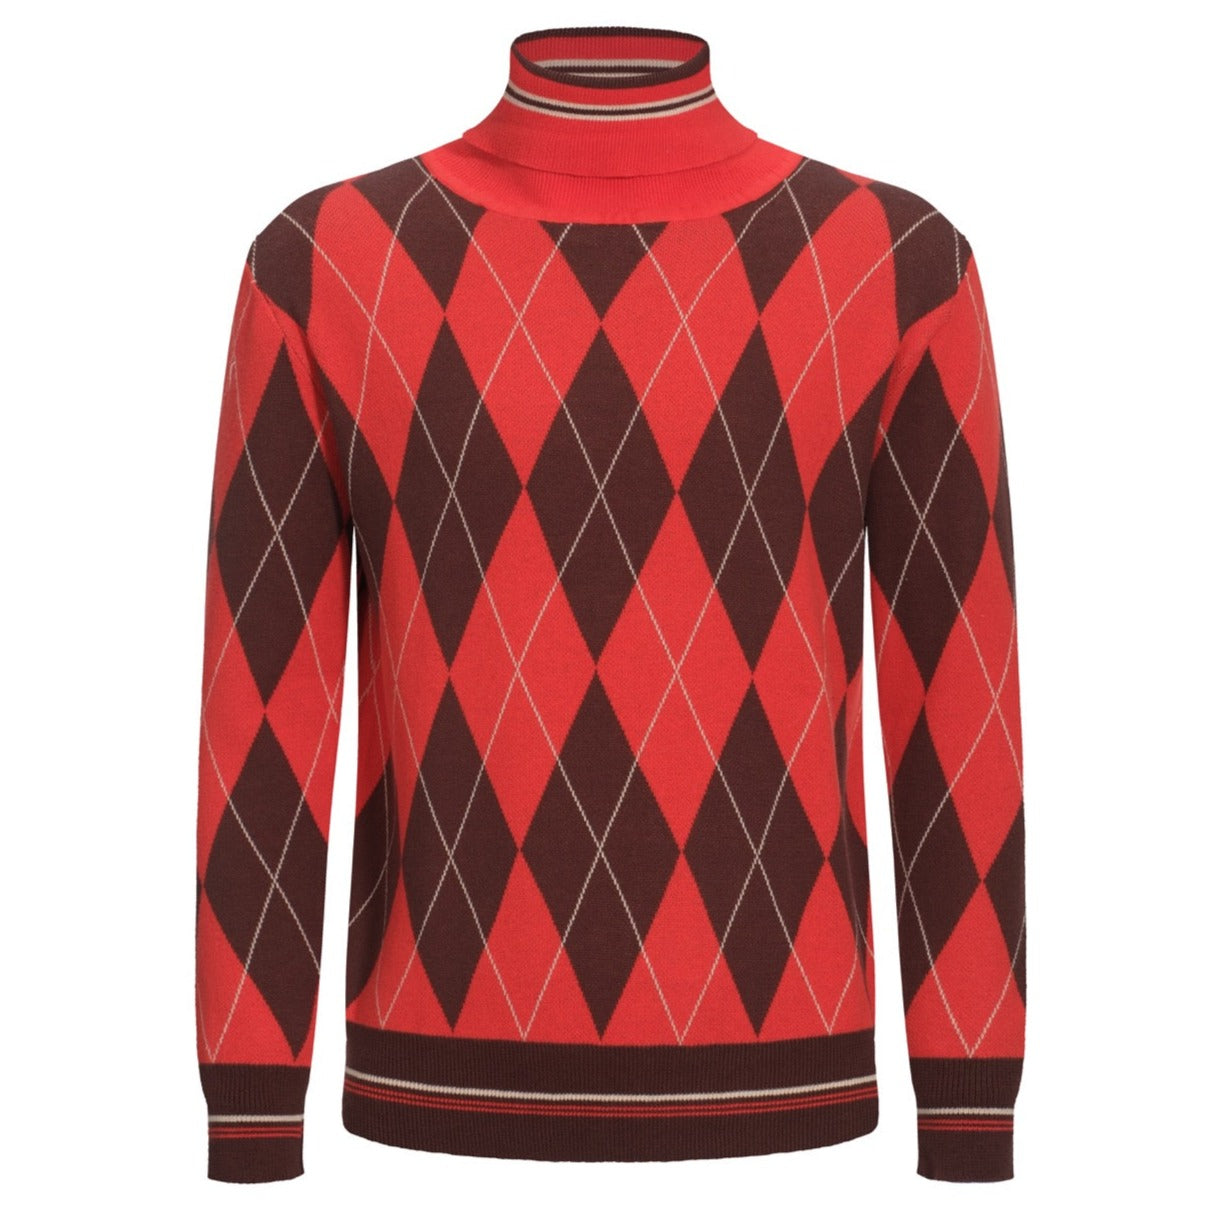 Men's Orange And Reddish Brown Diamond Pattern Knitted Mid-High Collar Long-Sleeved Top